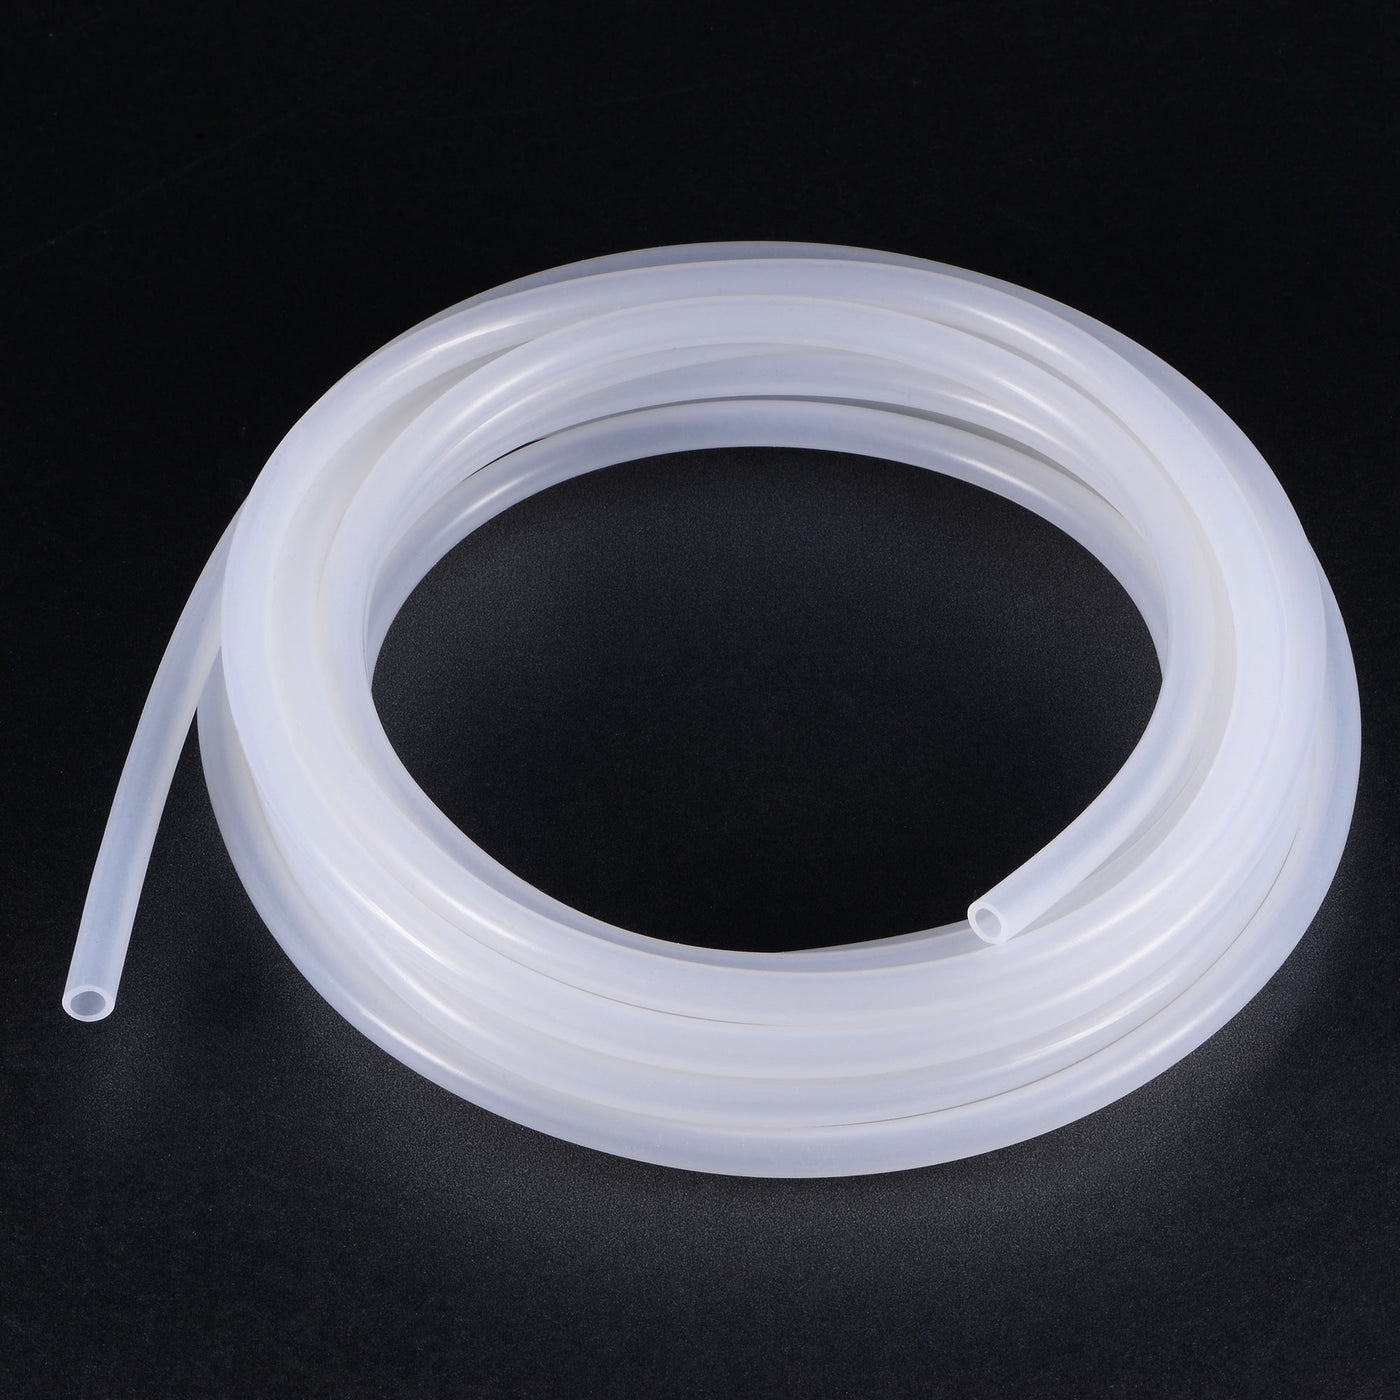 uxcell Uxcell Silicone Tubing 4mm ID 6mm(1/4") OD 5m Aquarium Pump Air Water Hose with Connectors